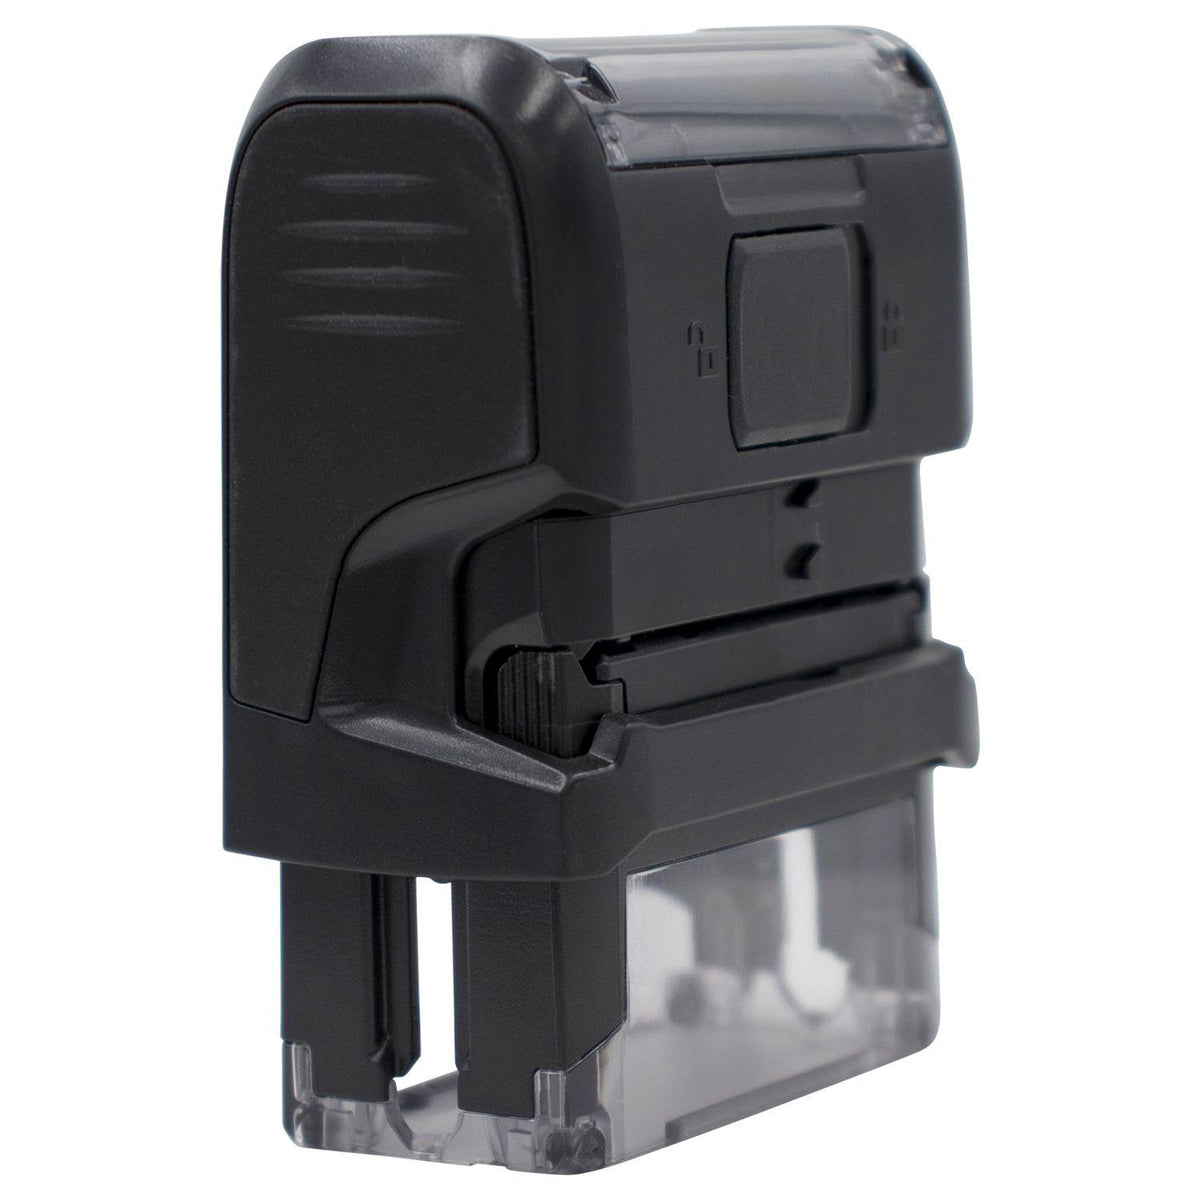 Self Inking Copy Stamp - Engineer Seal Stamps - Brand_Trodat, Impression Size_Small, Stamp Type_Self-Inking Stamp, Type of Use_Office